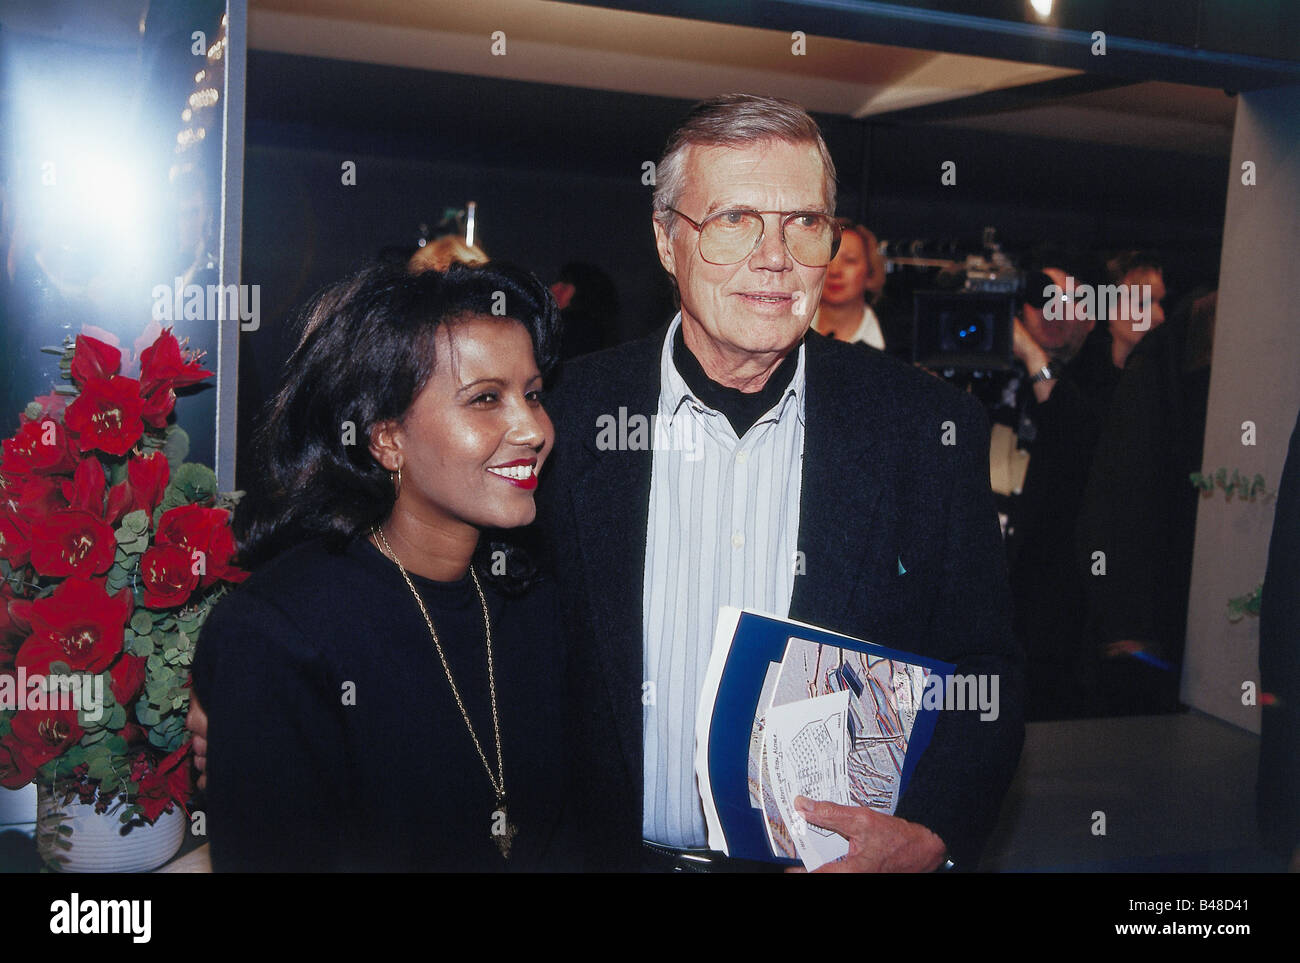 Boehm, Karlheinz, 16.3.1928 - 29.5.2014, Austrian actor, half length, with his wife Almaz, at event, early 1990s, Stock Photo